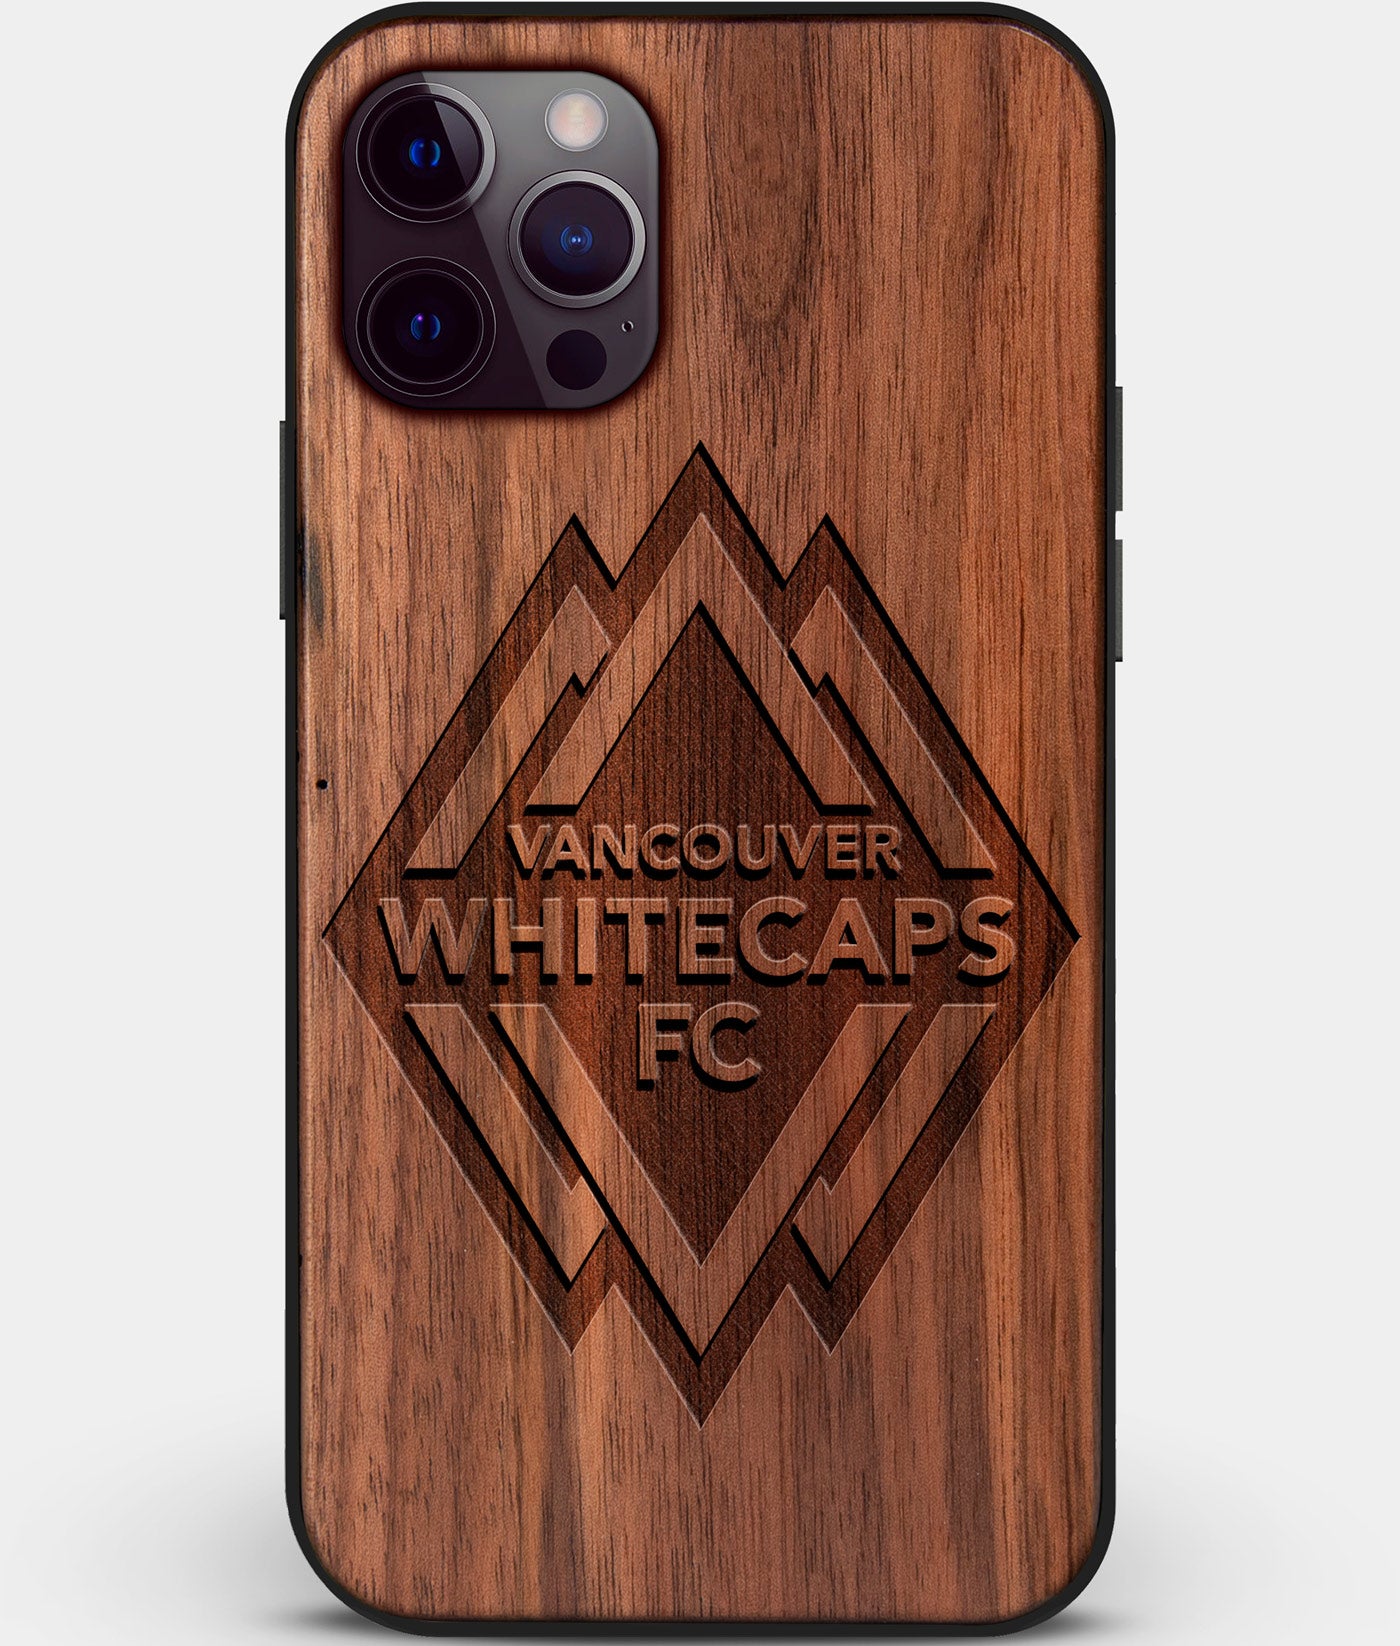 Custom Carved Wood Vancouver Whitecaps FC iPhone 12 Pro Case | Personalized Walnut Wood Vancouver Whitecaps FC Cover, Birthday Gift, Gifts For Him, Monogrammed Gift For Fan | by Engraved In Nature